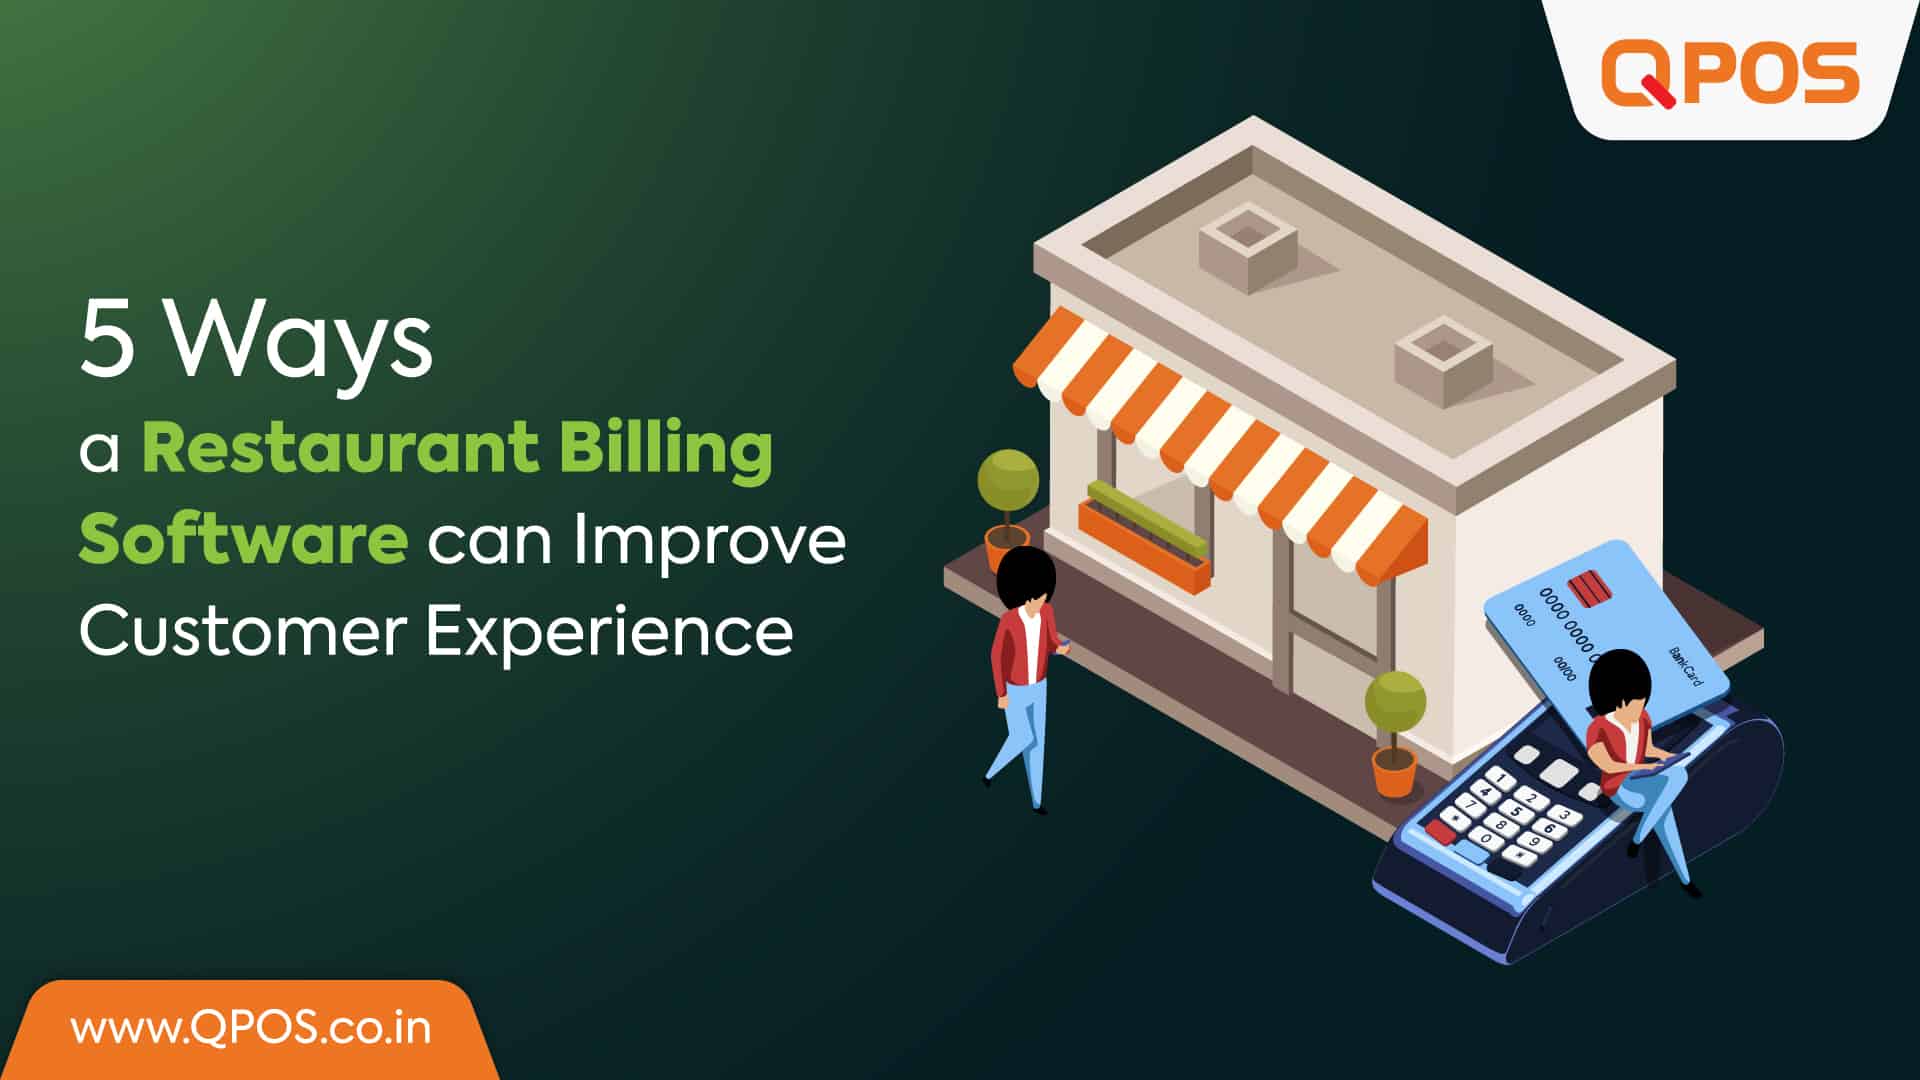 5 Ways a Restaurant Billing Software Can Improve Customer Experience-QPOS